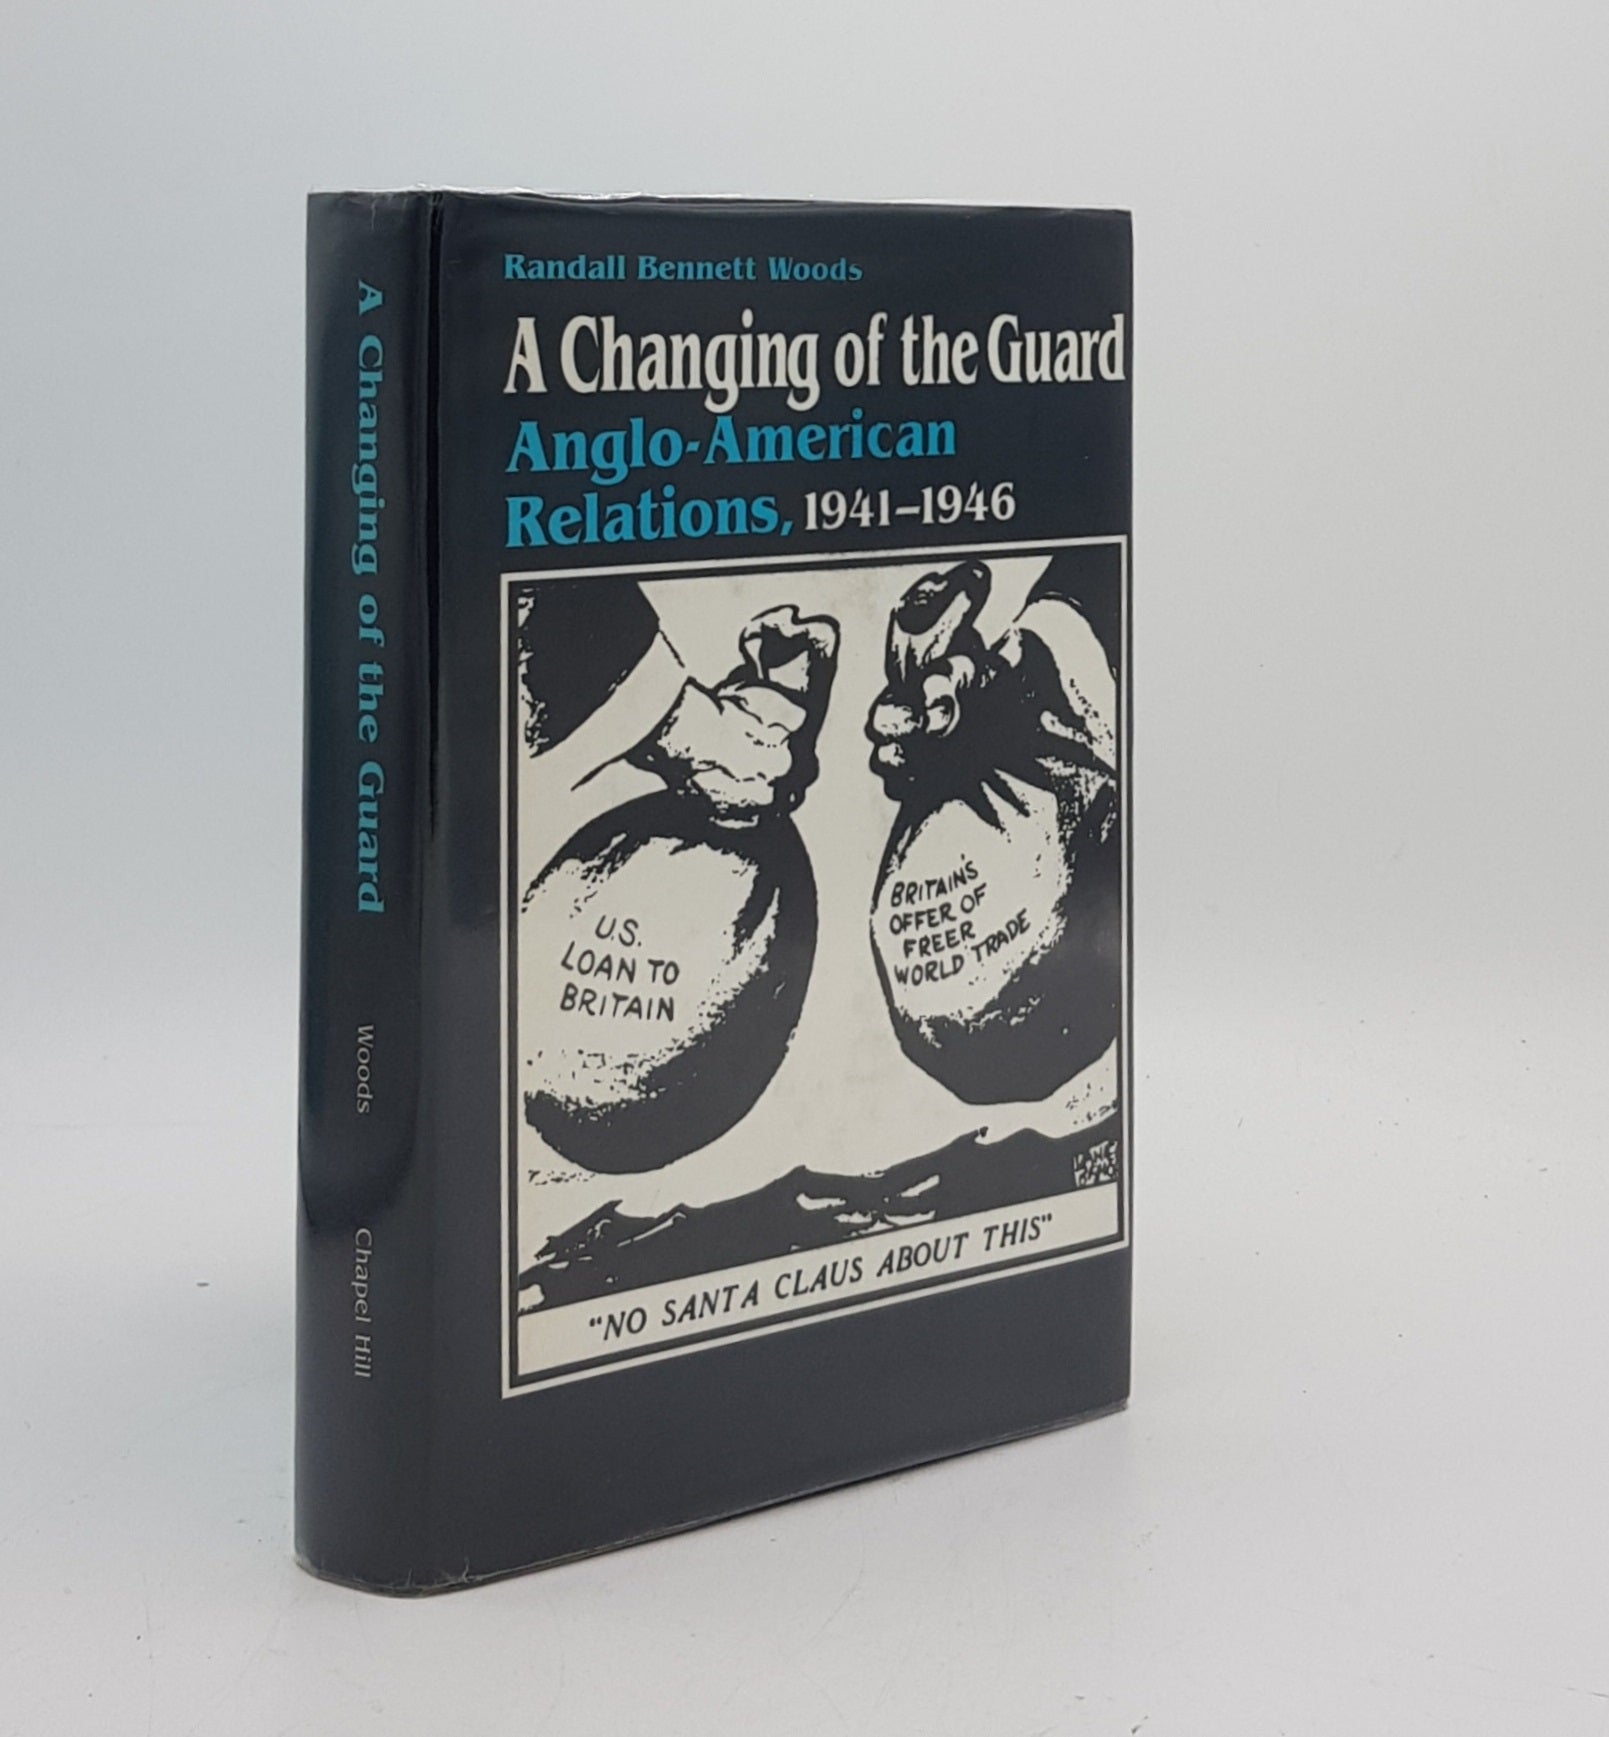 WOODS Randall Bennett - A Changing of the Guard Anglo-American Relations 1941-1946